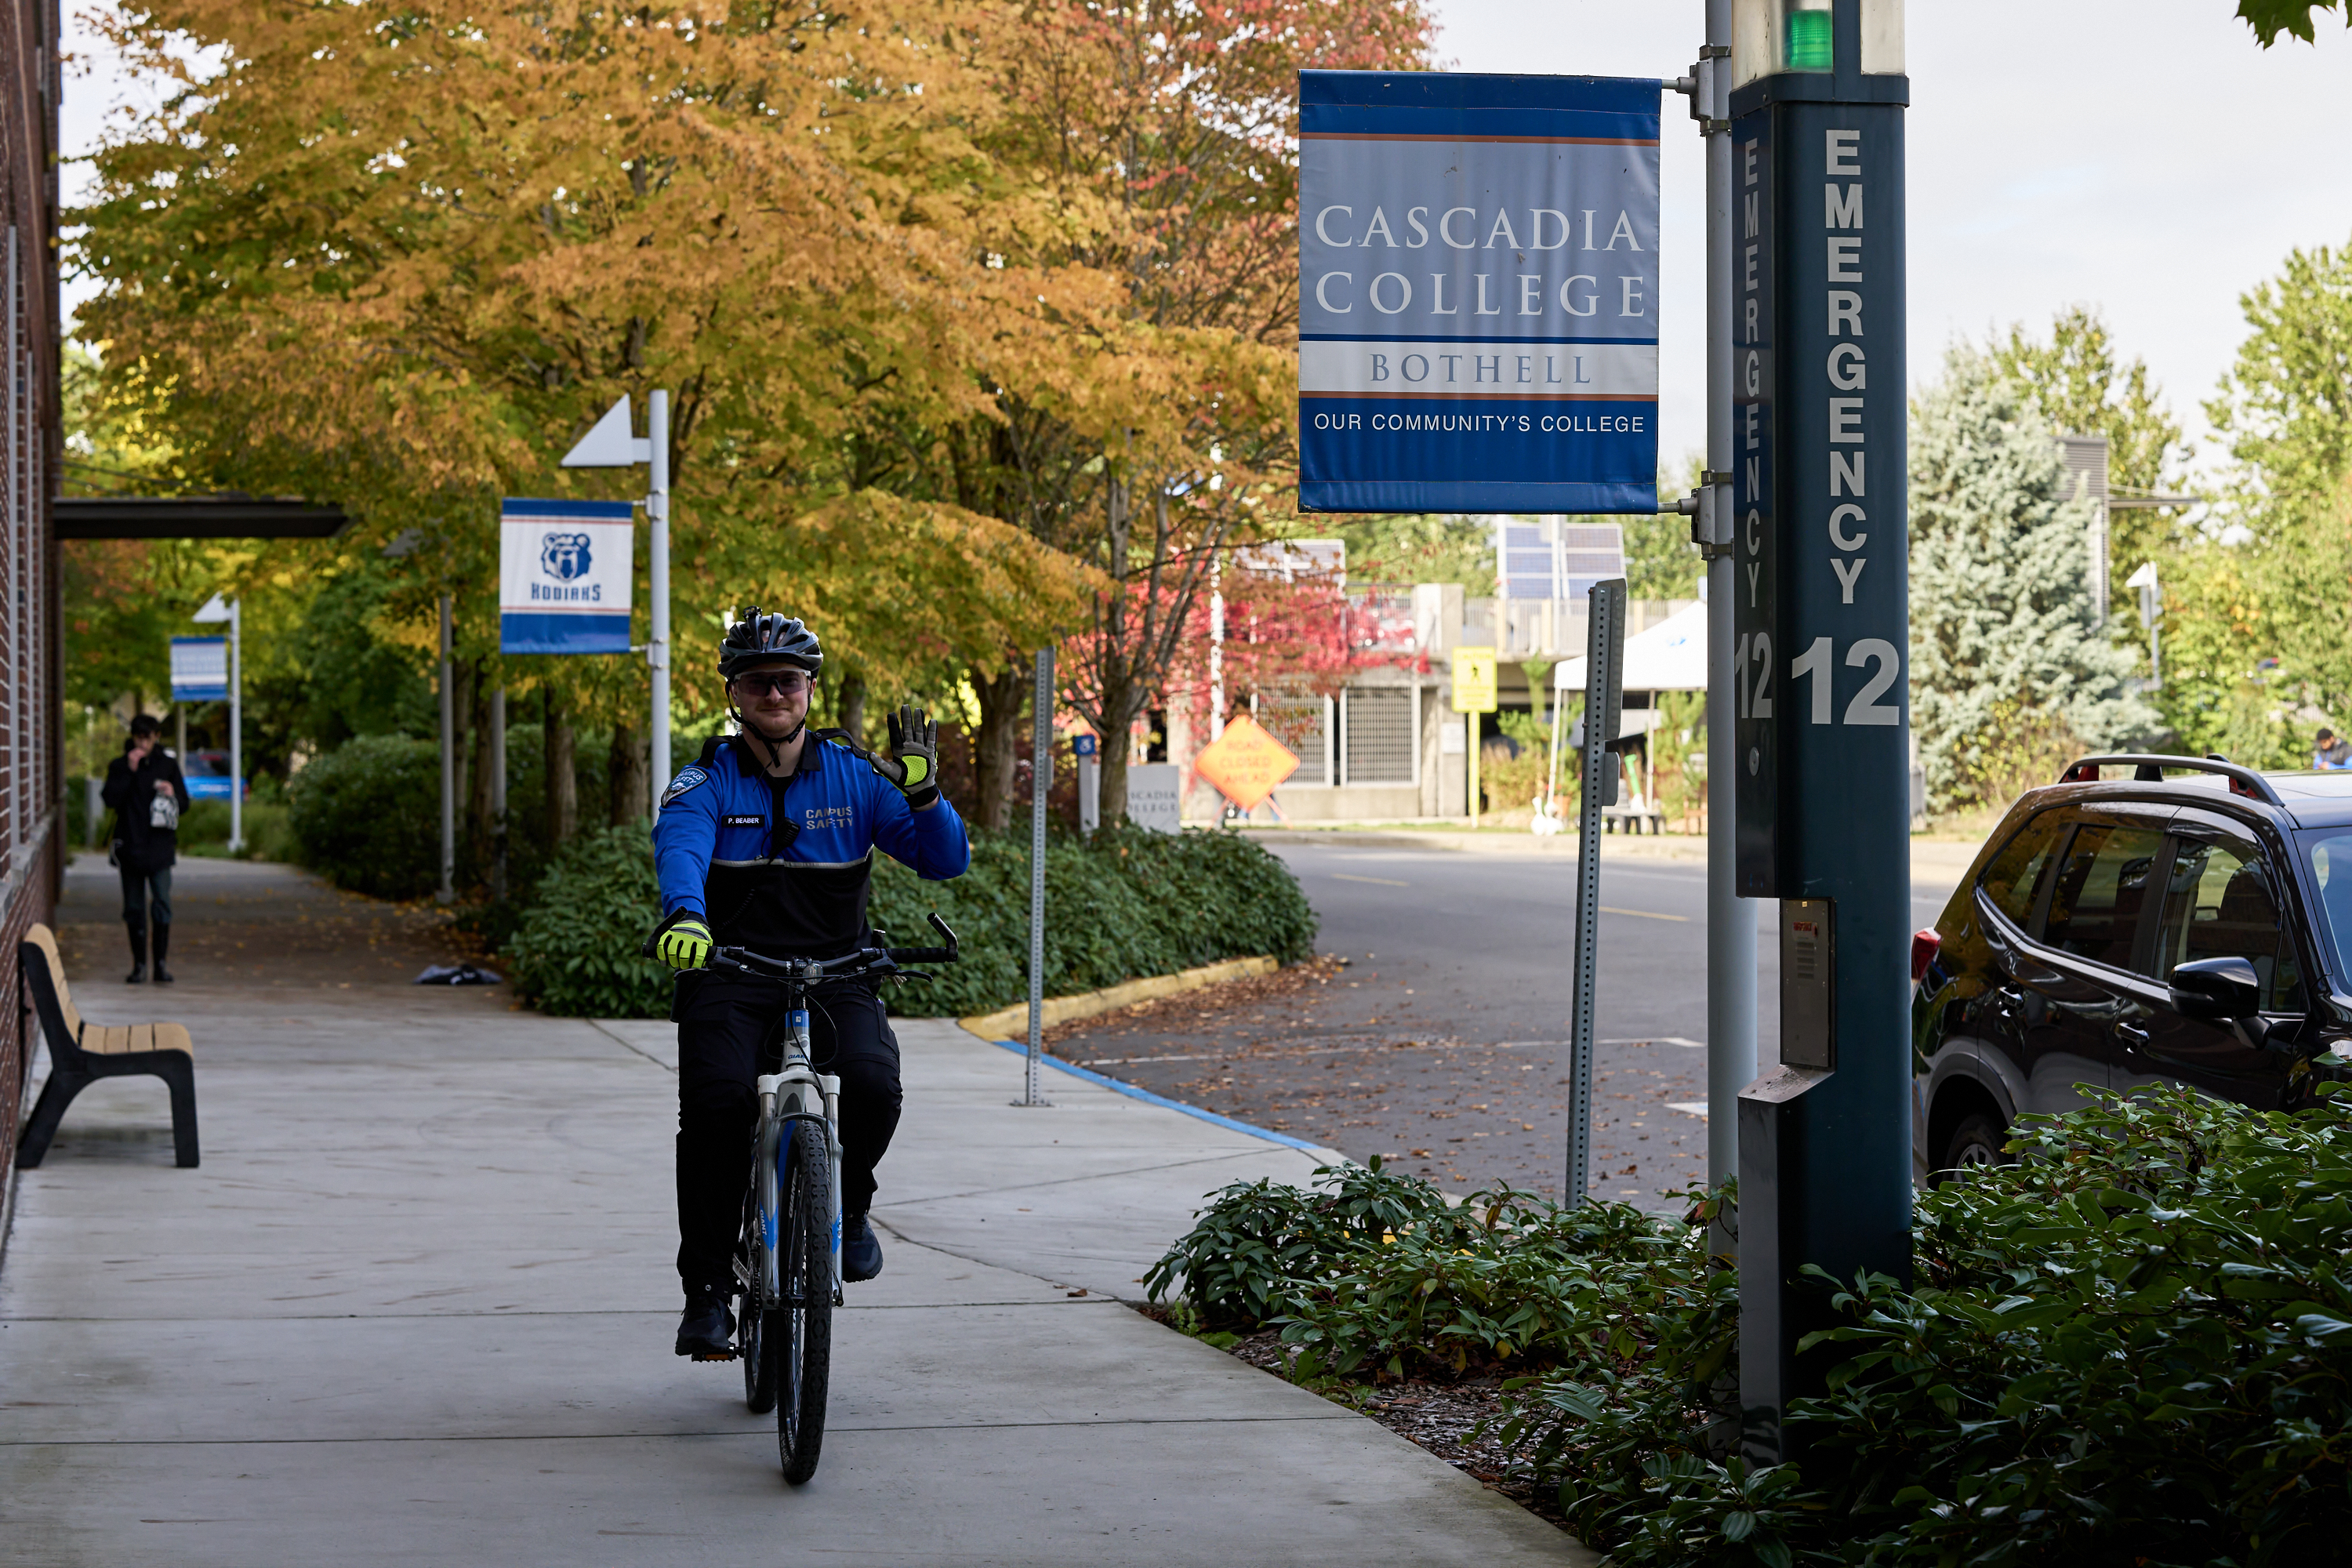 campus employee biking on campus way with Cascadia banner in background